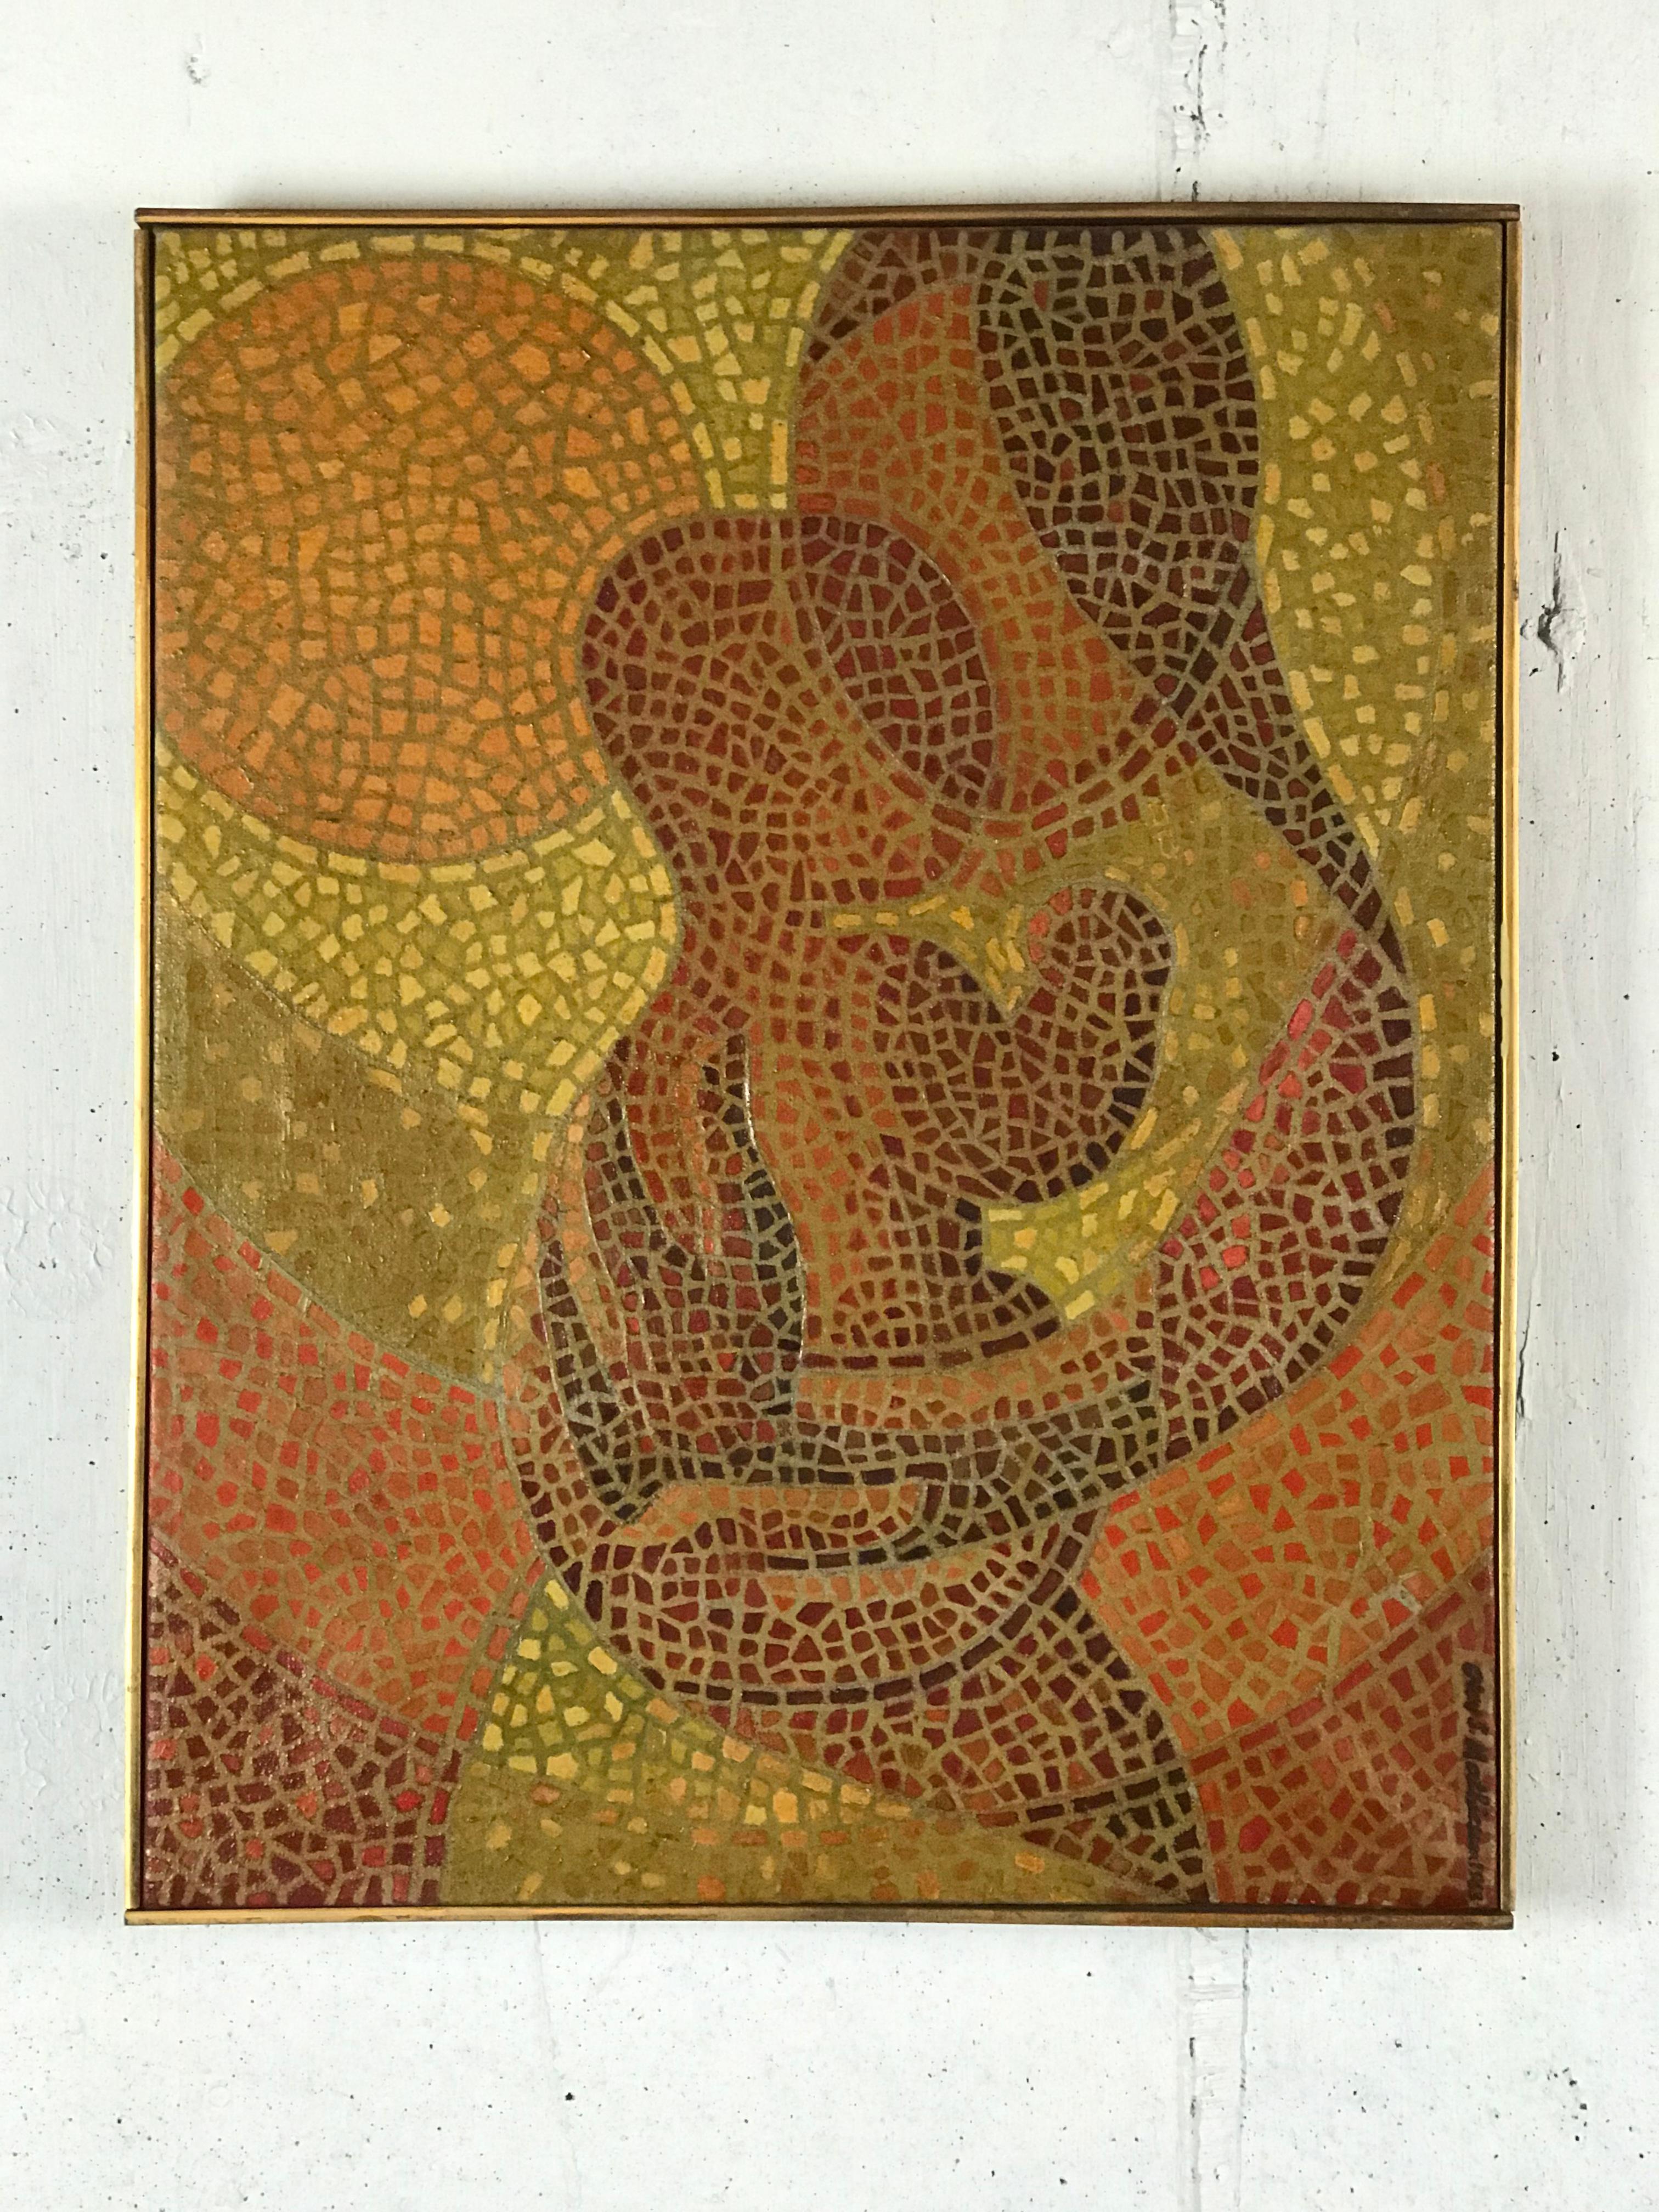 Madonna Mother & Child Mosaic Painting by Olav Mathiesen, Oil on Canvas, 1963 5